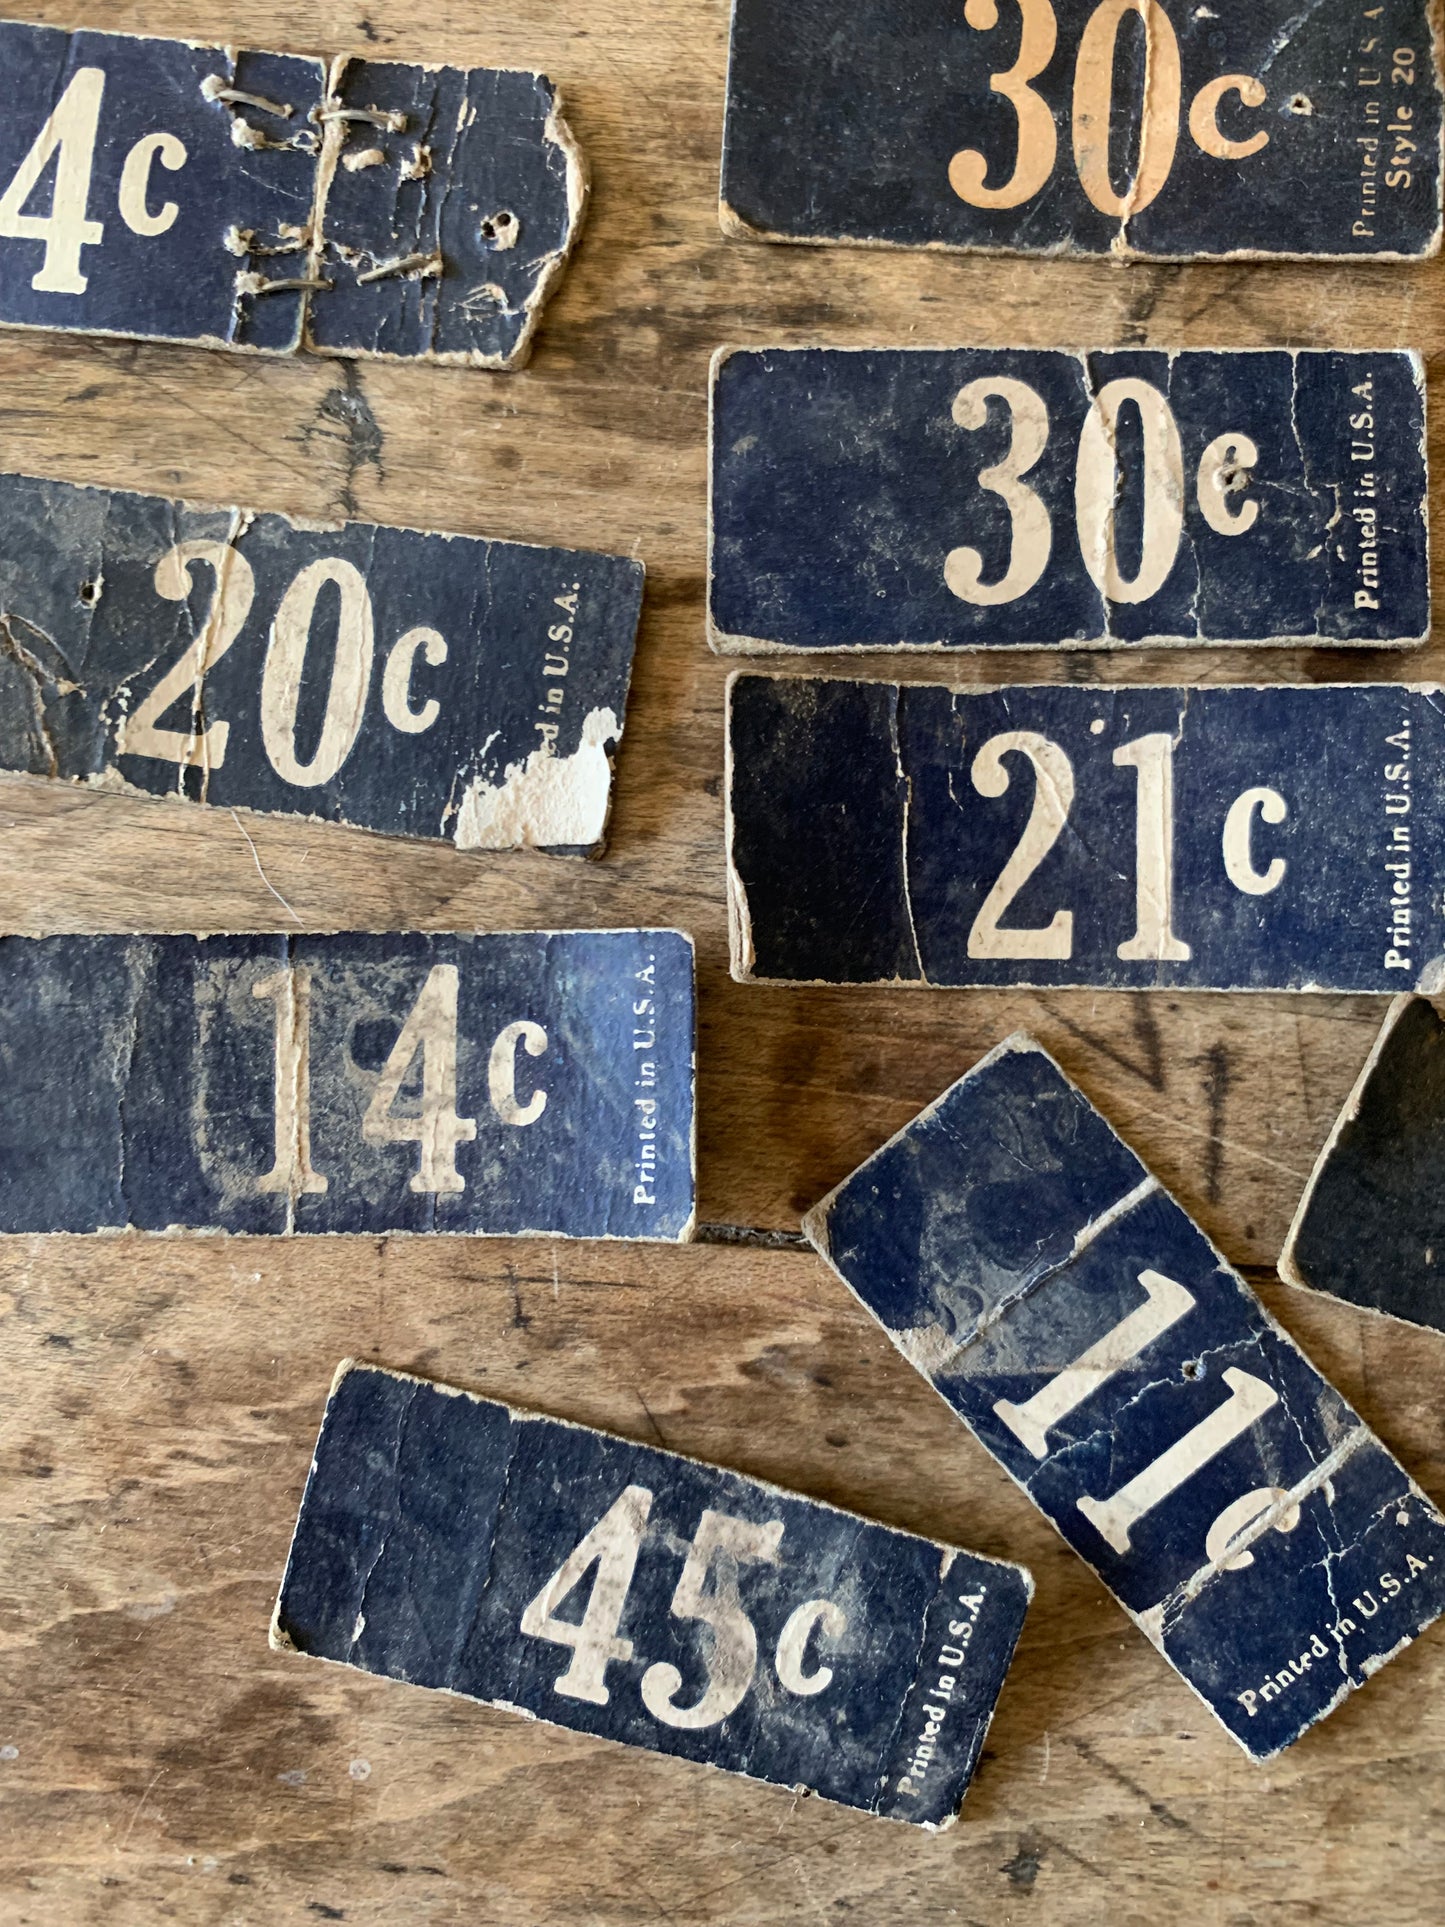 Vintage double sided cardboard price tags | general store